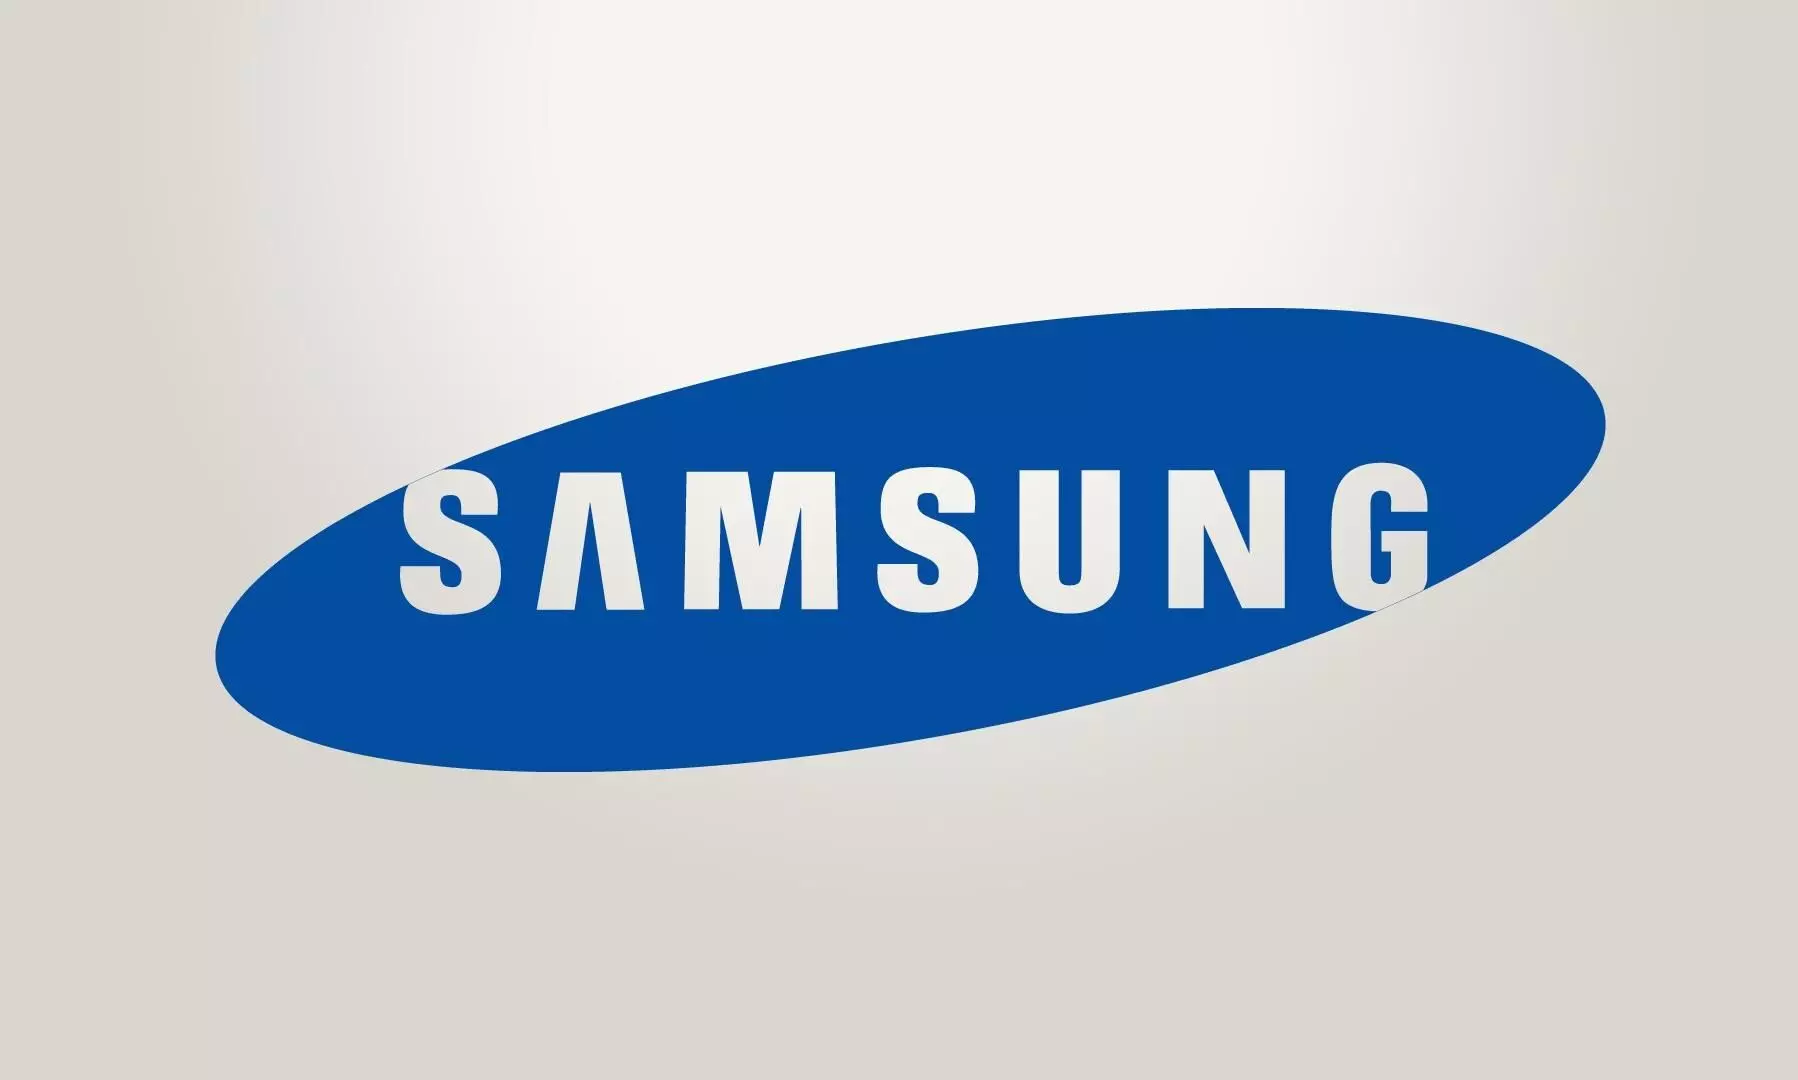 Samsung to launch 3 new smartphones in August